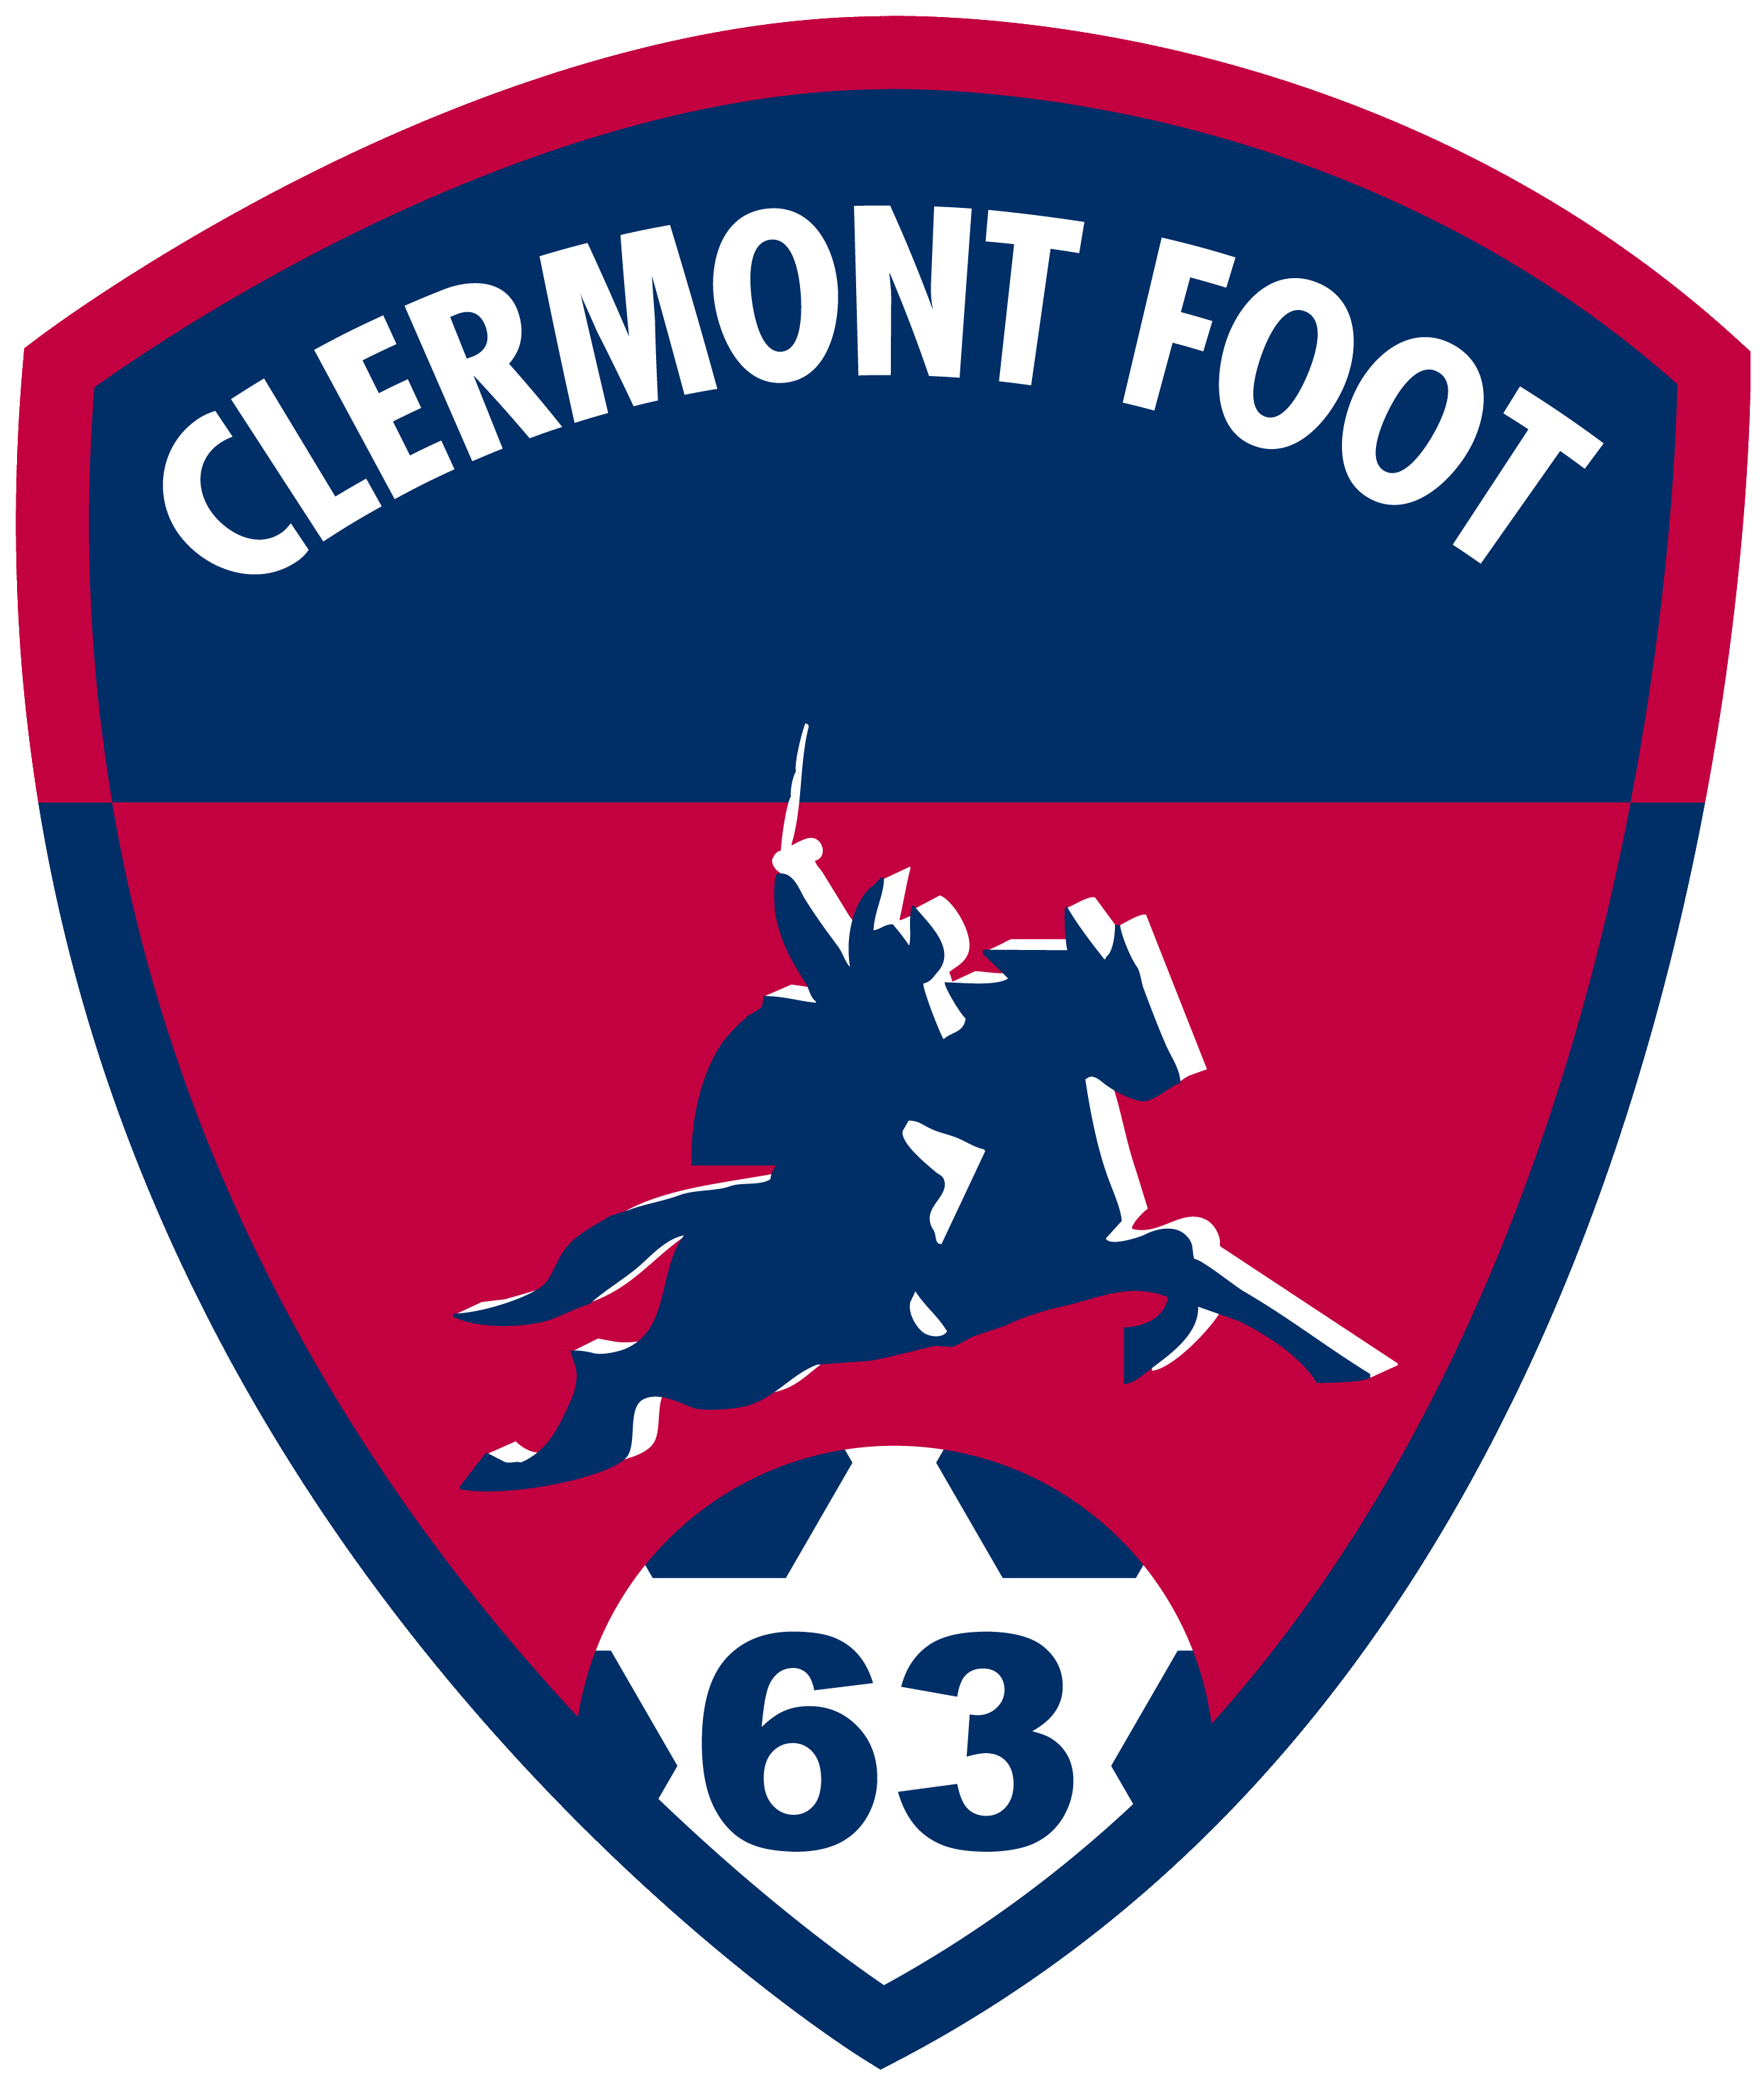 Clermont Foot 63 vs Strasbourg Prediction: As Tight as always